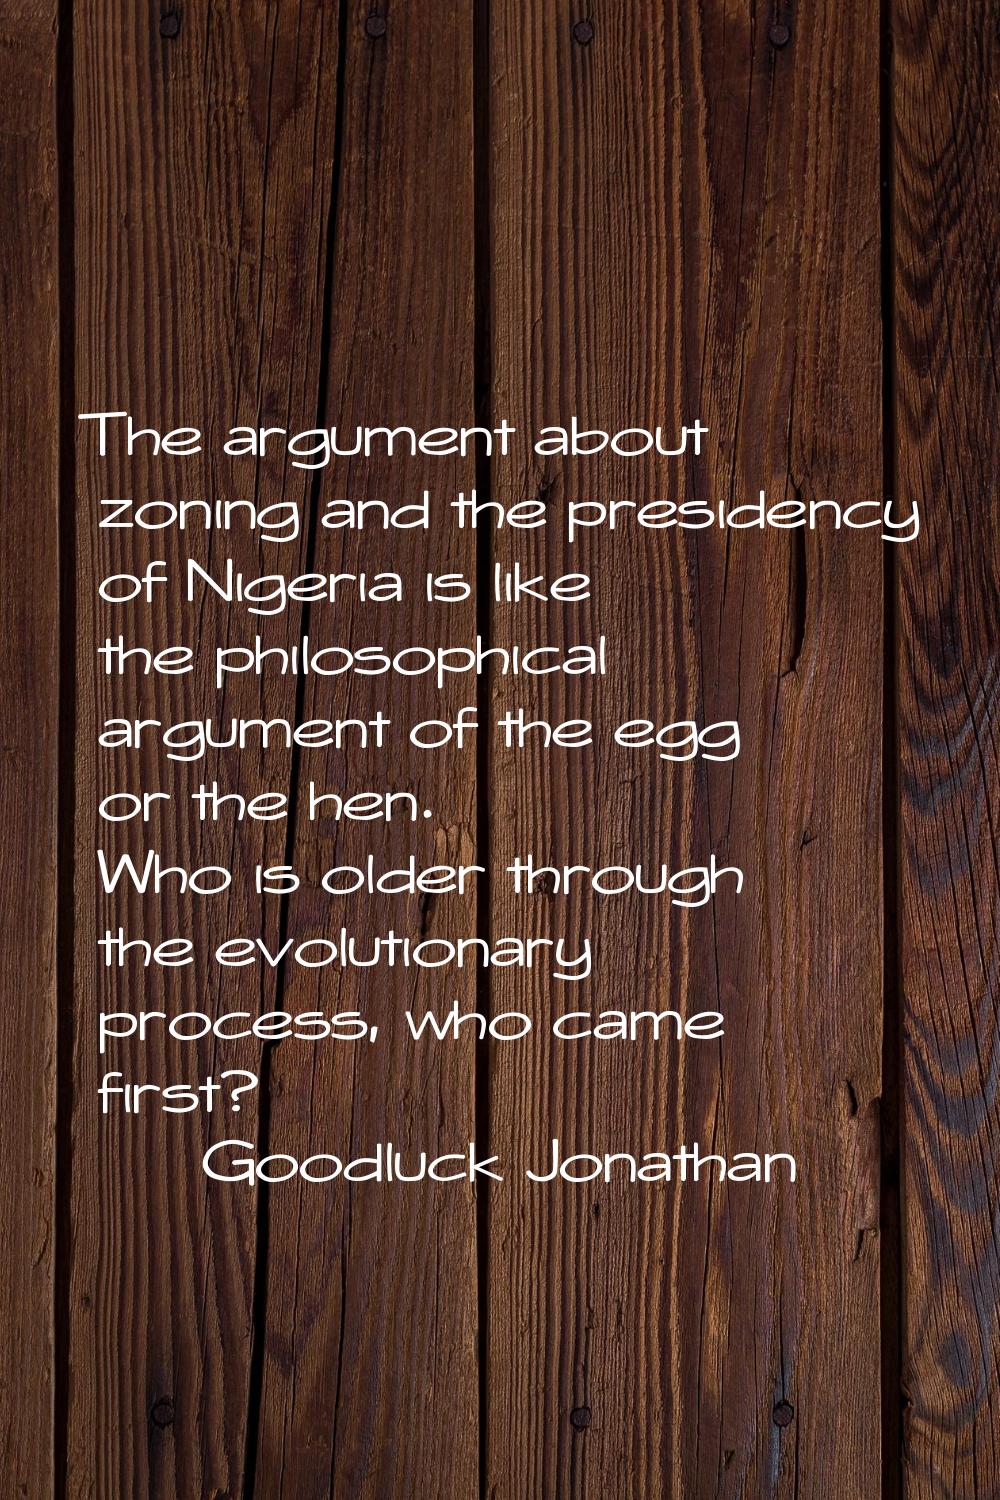 The argument about zoning and the presidency of Nigeria is like the philosophical argument of the e